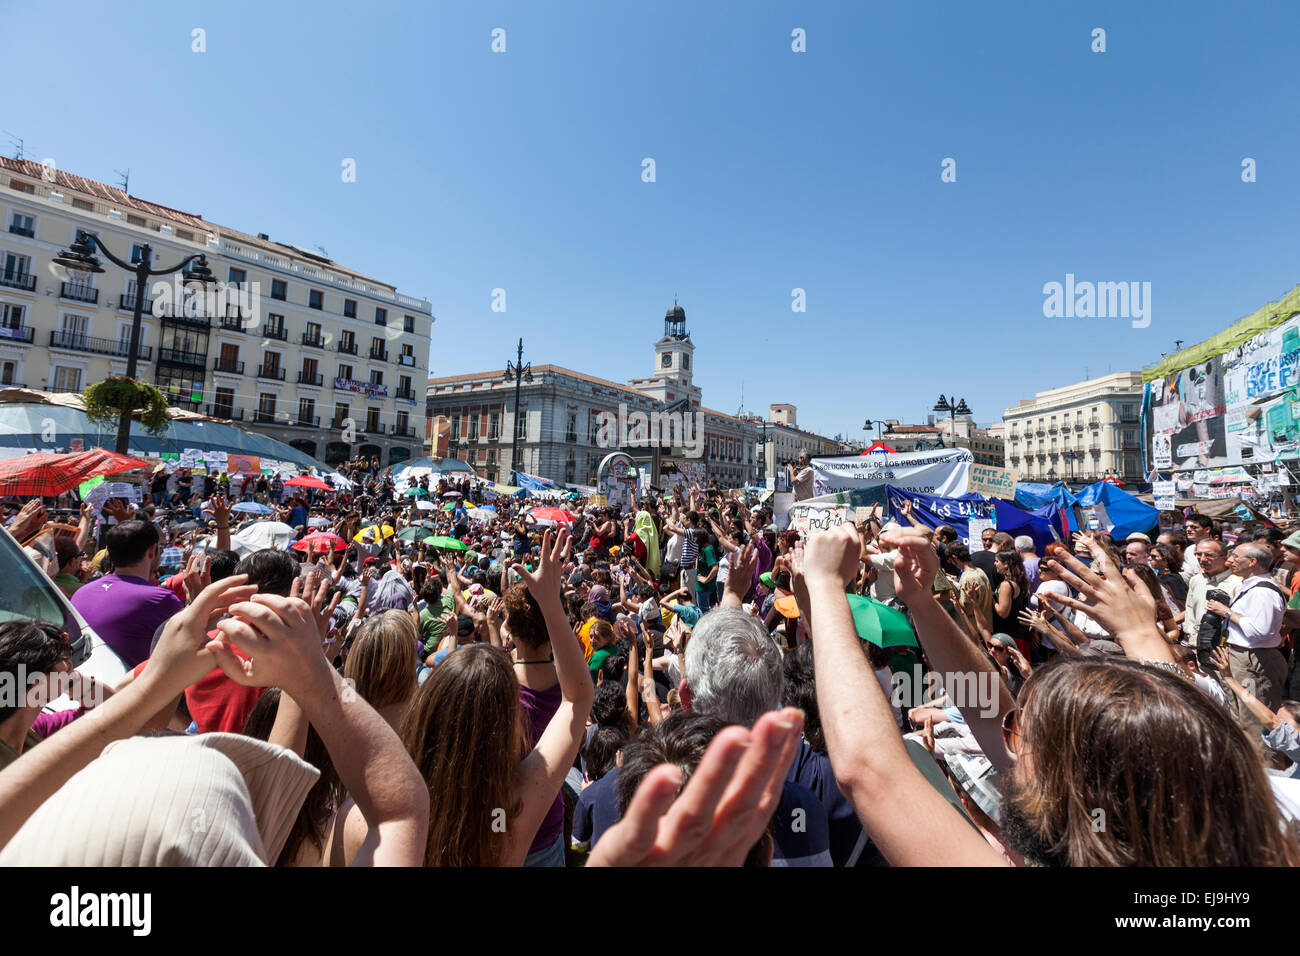 Puerta del Sol, anti-austerity movement in Spain, also referred to as the 15-M Movement,   Movimiento 15-M, the Indignants Movement Stock Photo